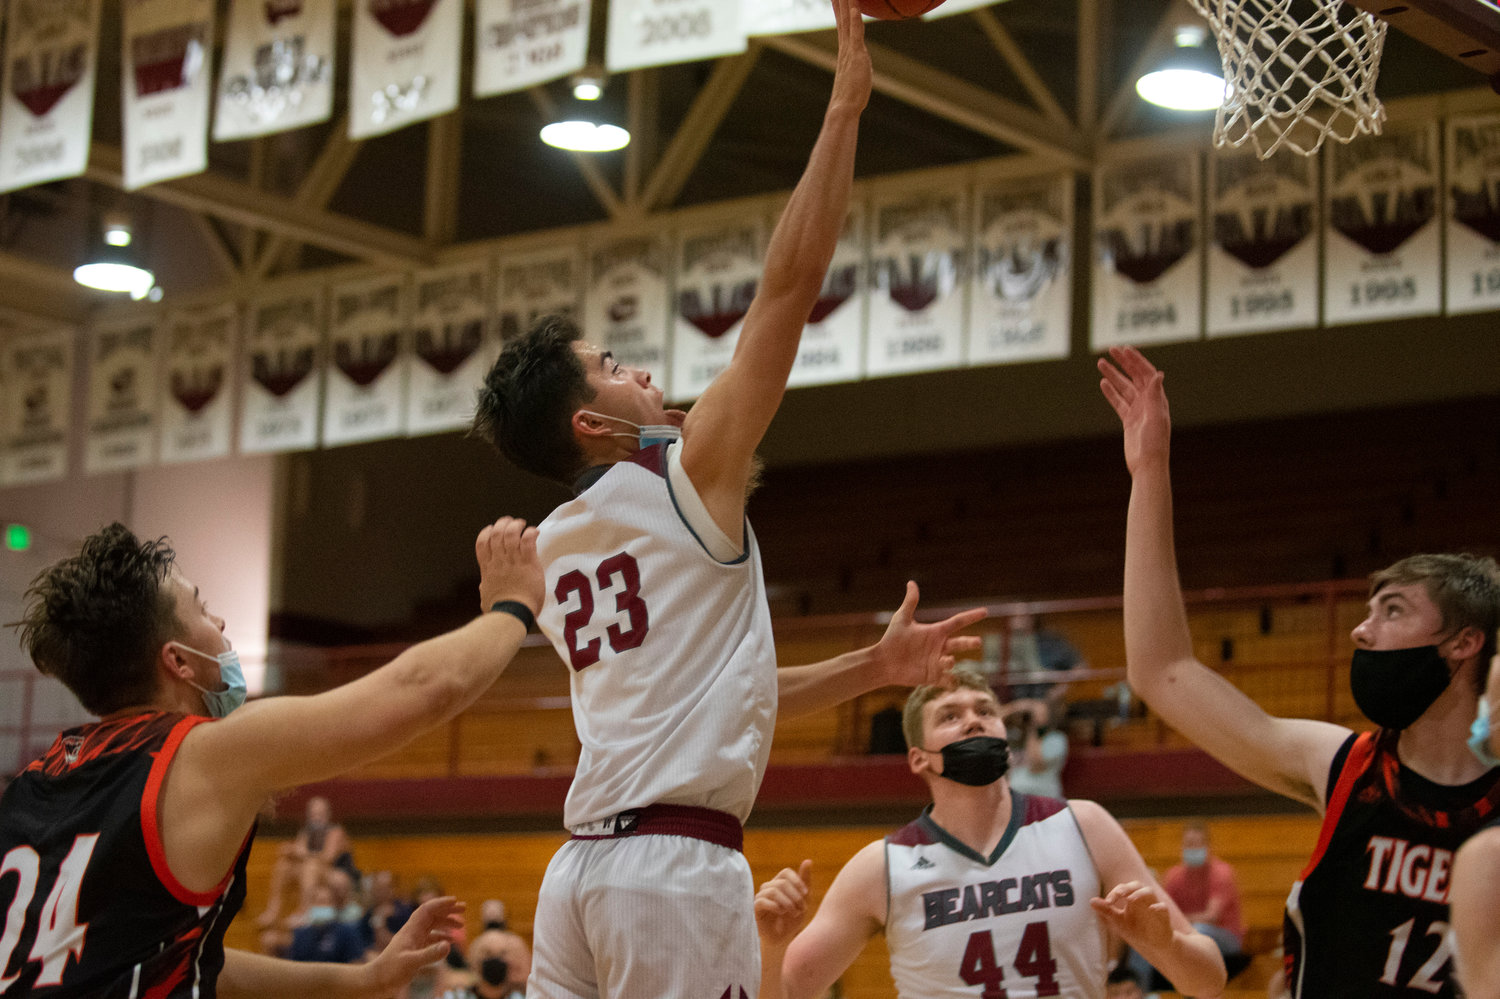 W.F. West point guard Gabe Cuestas leaps for a layup against Centralia on Wednesday.